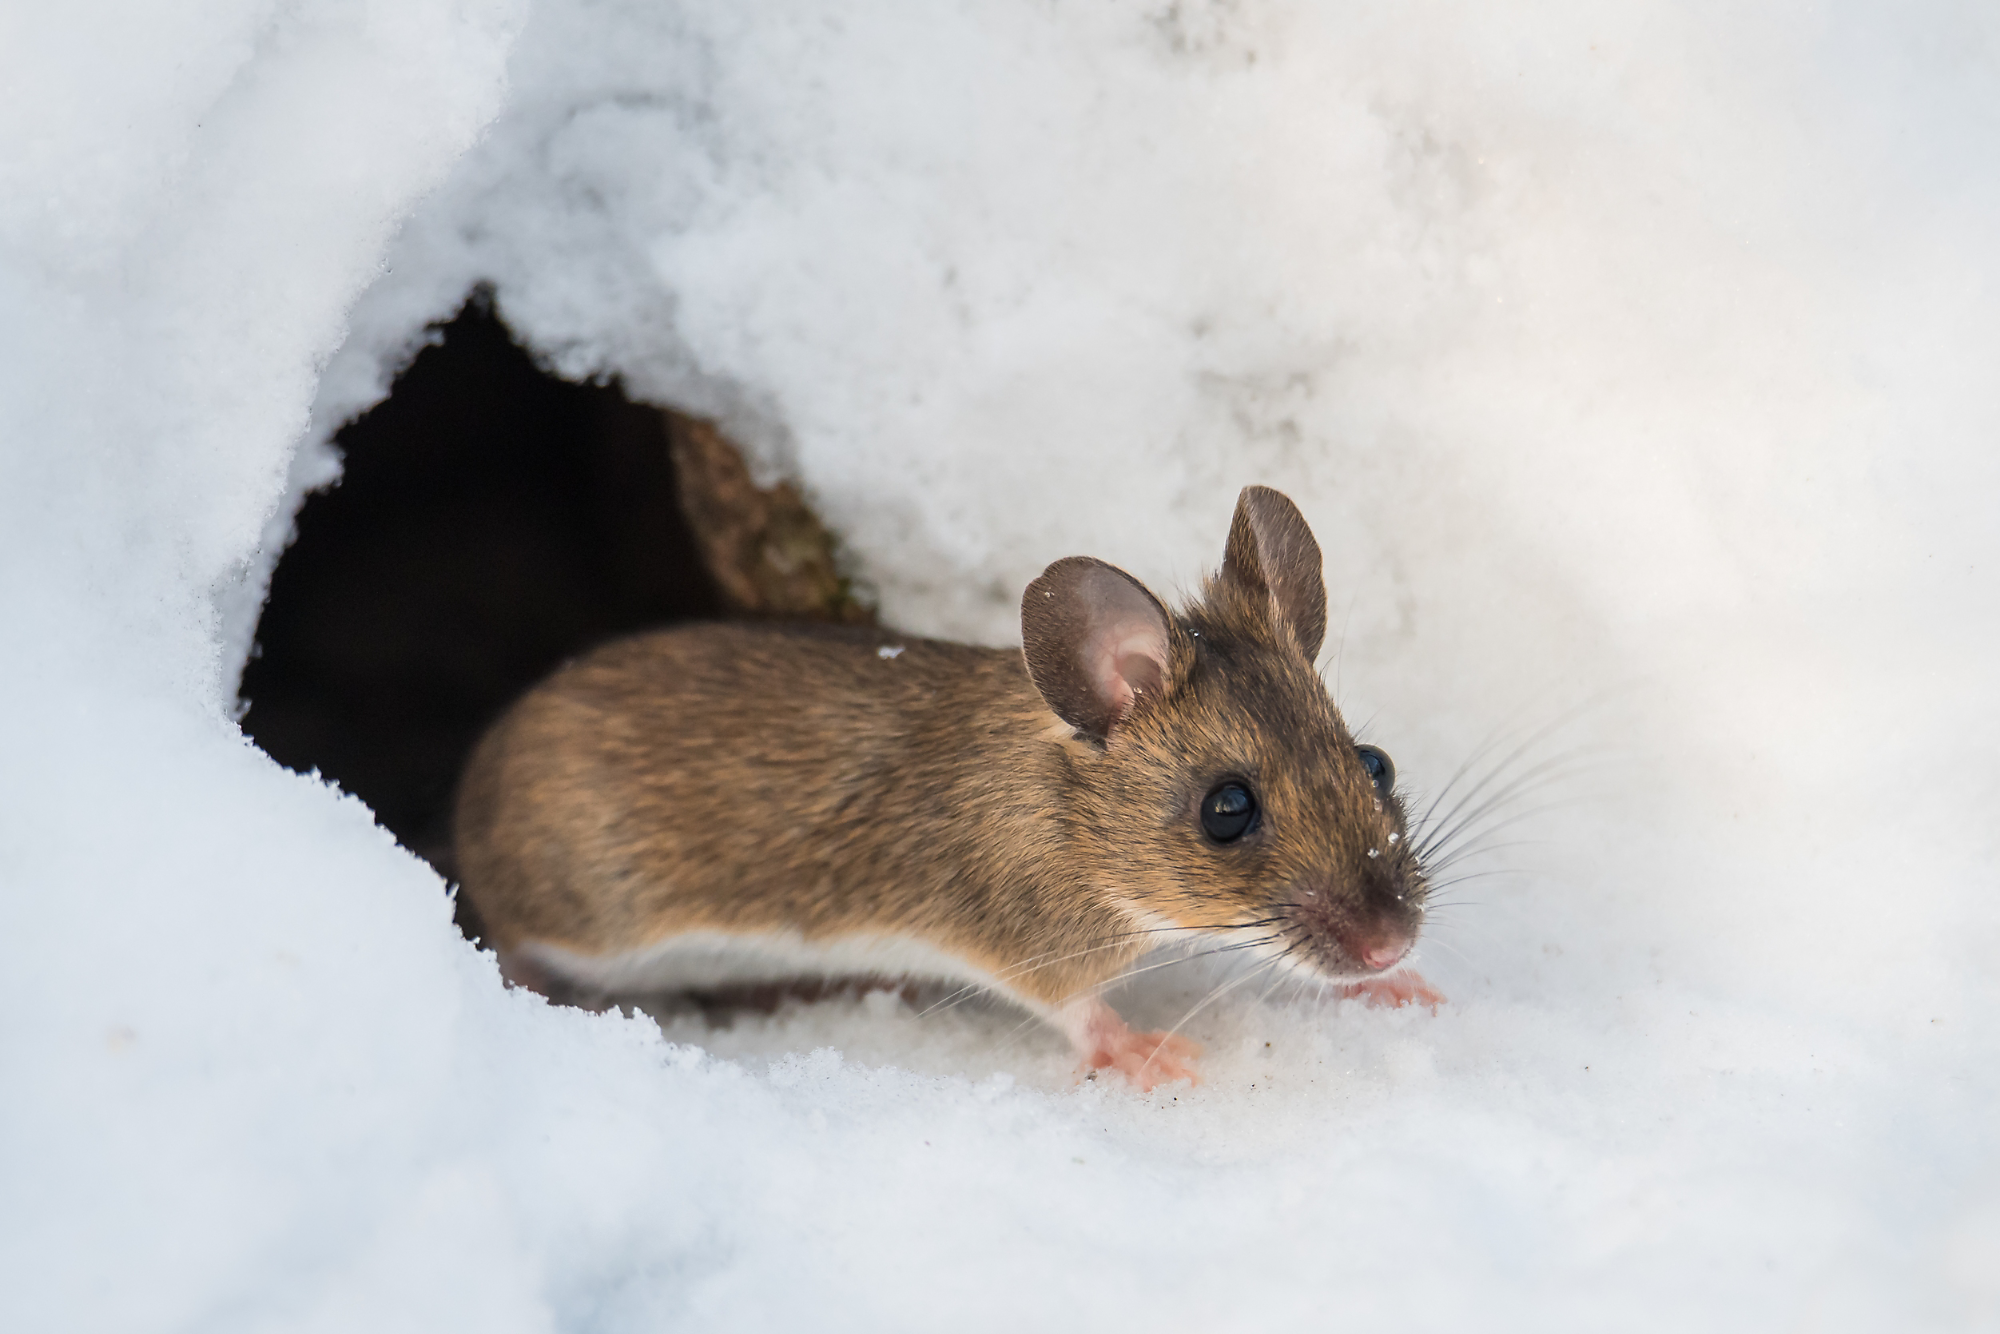 What Is Rodent Season and How Long Does It Last?